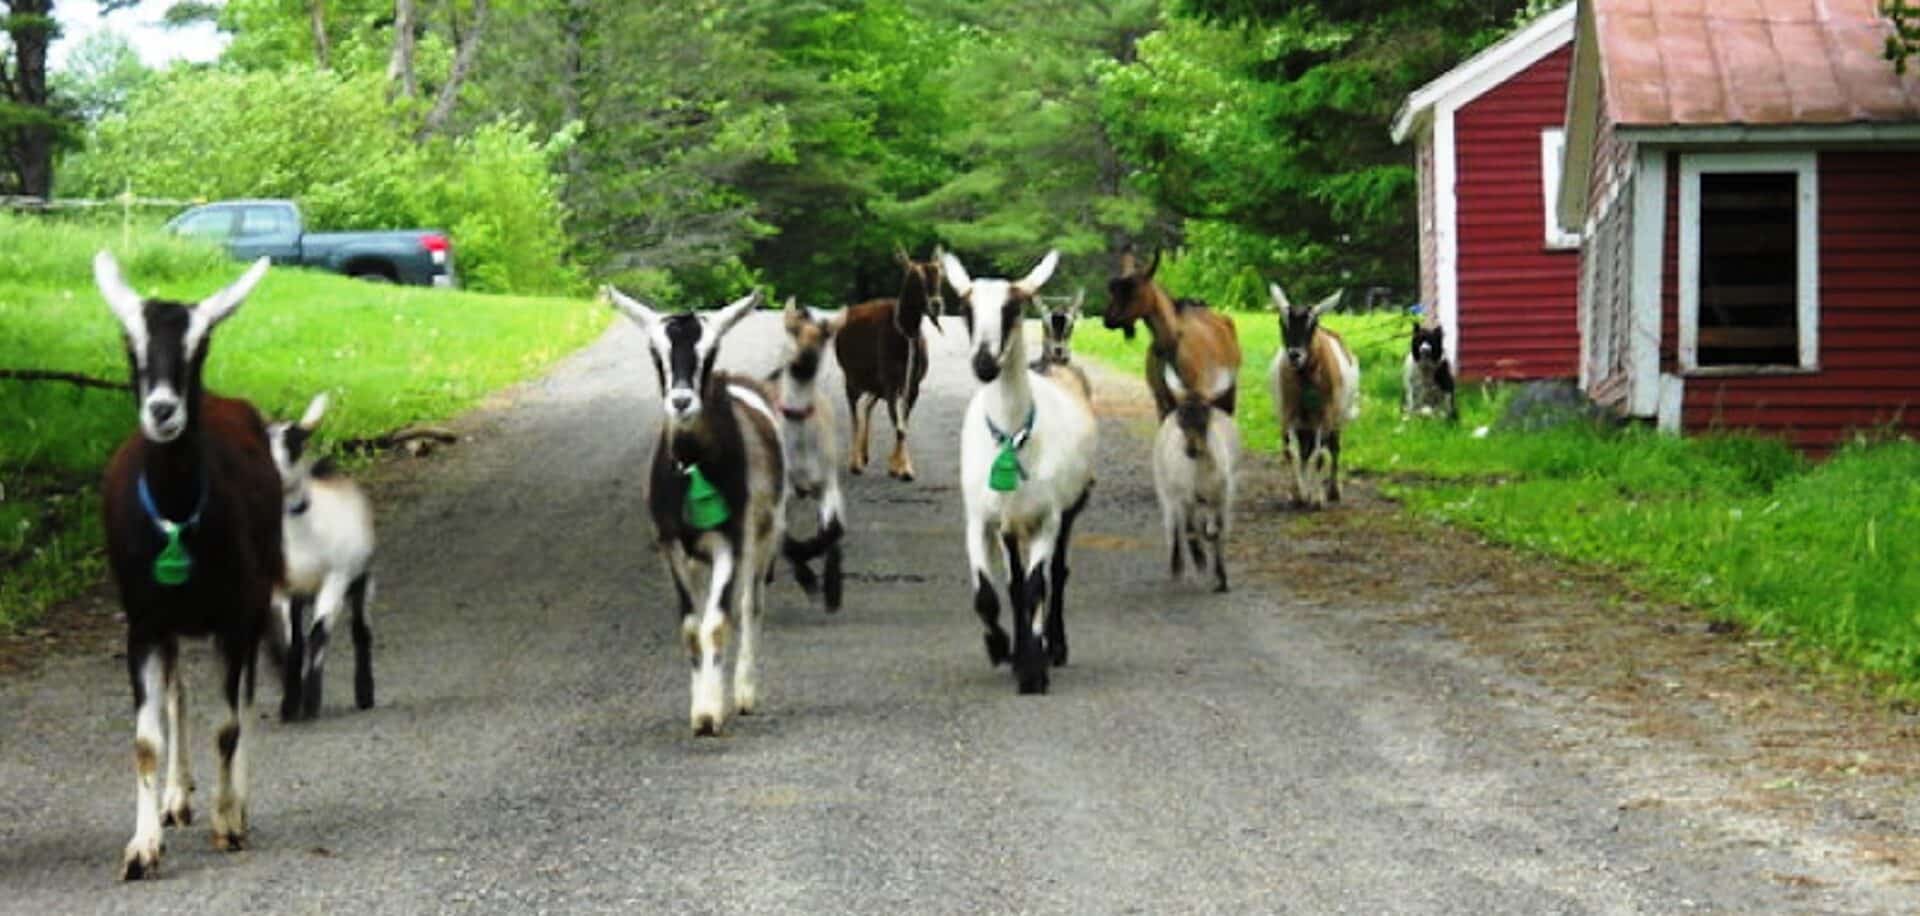 A group of goats walking down a country road near a red barn